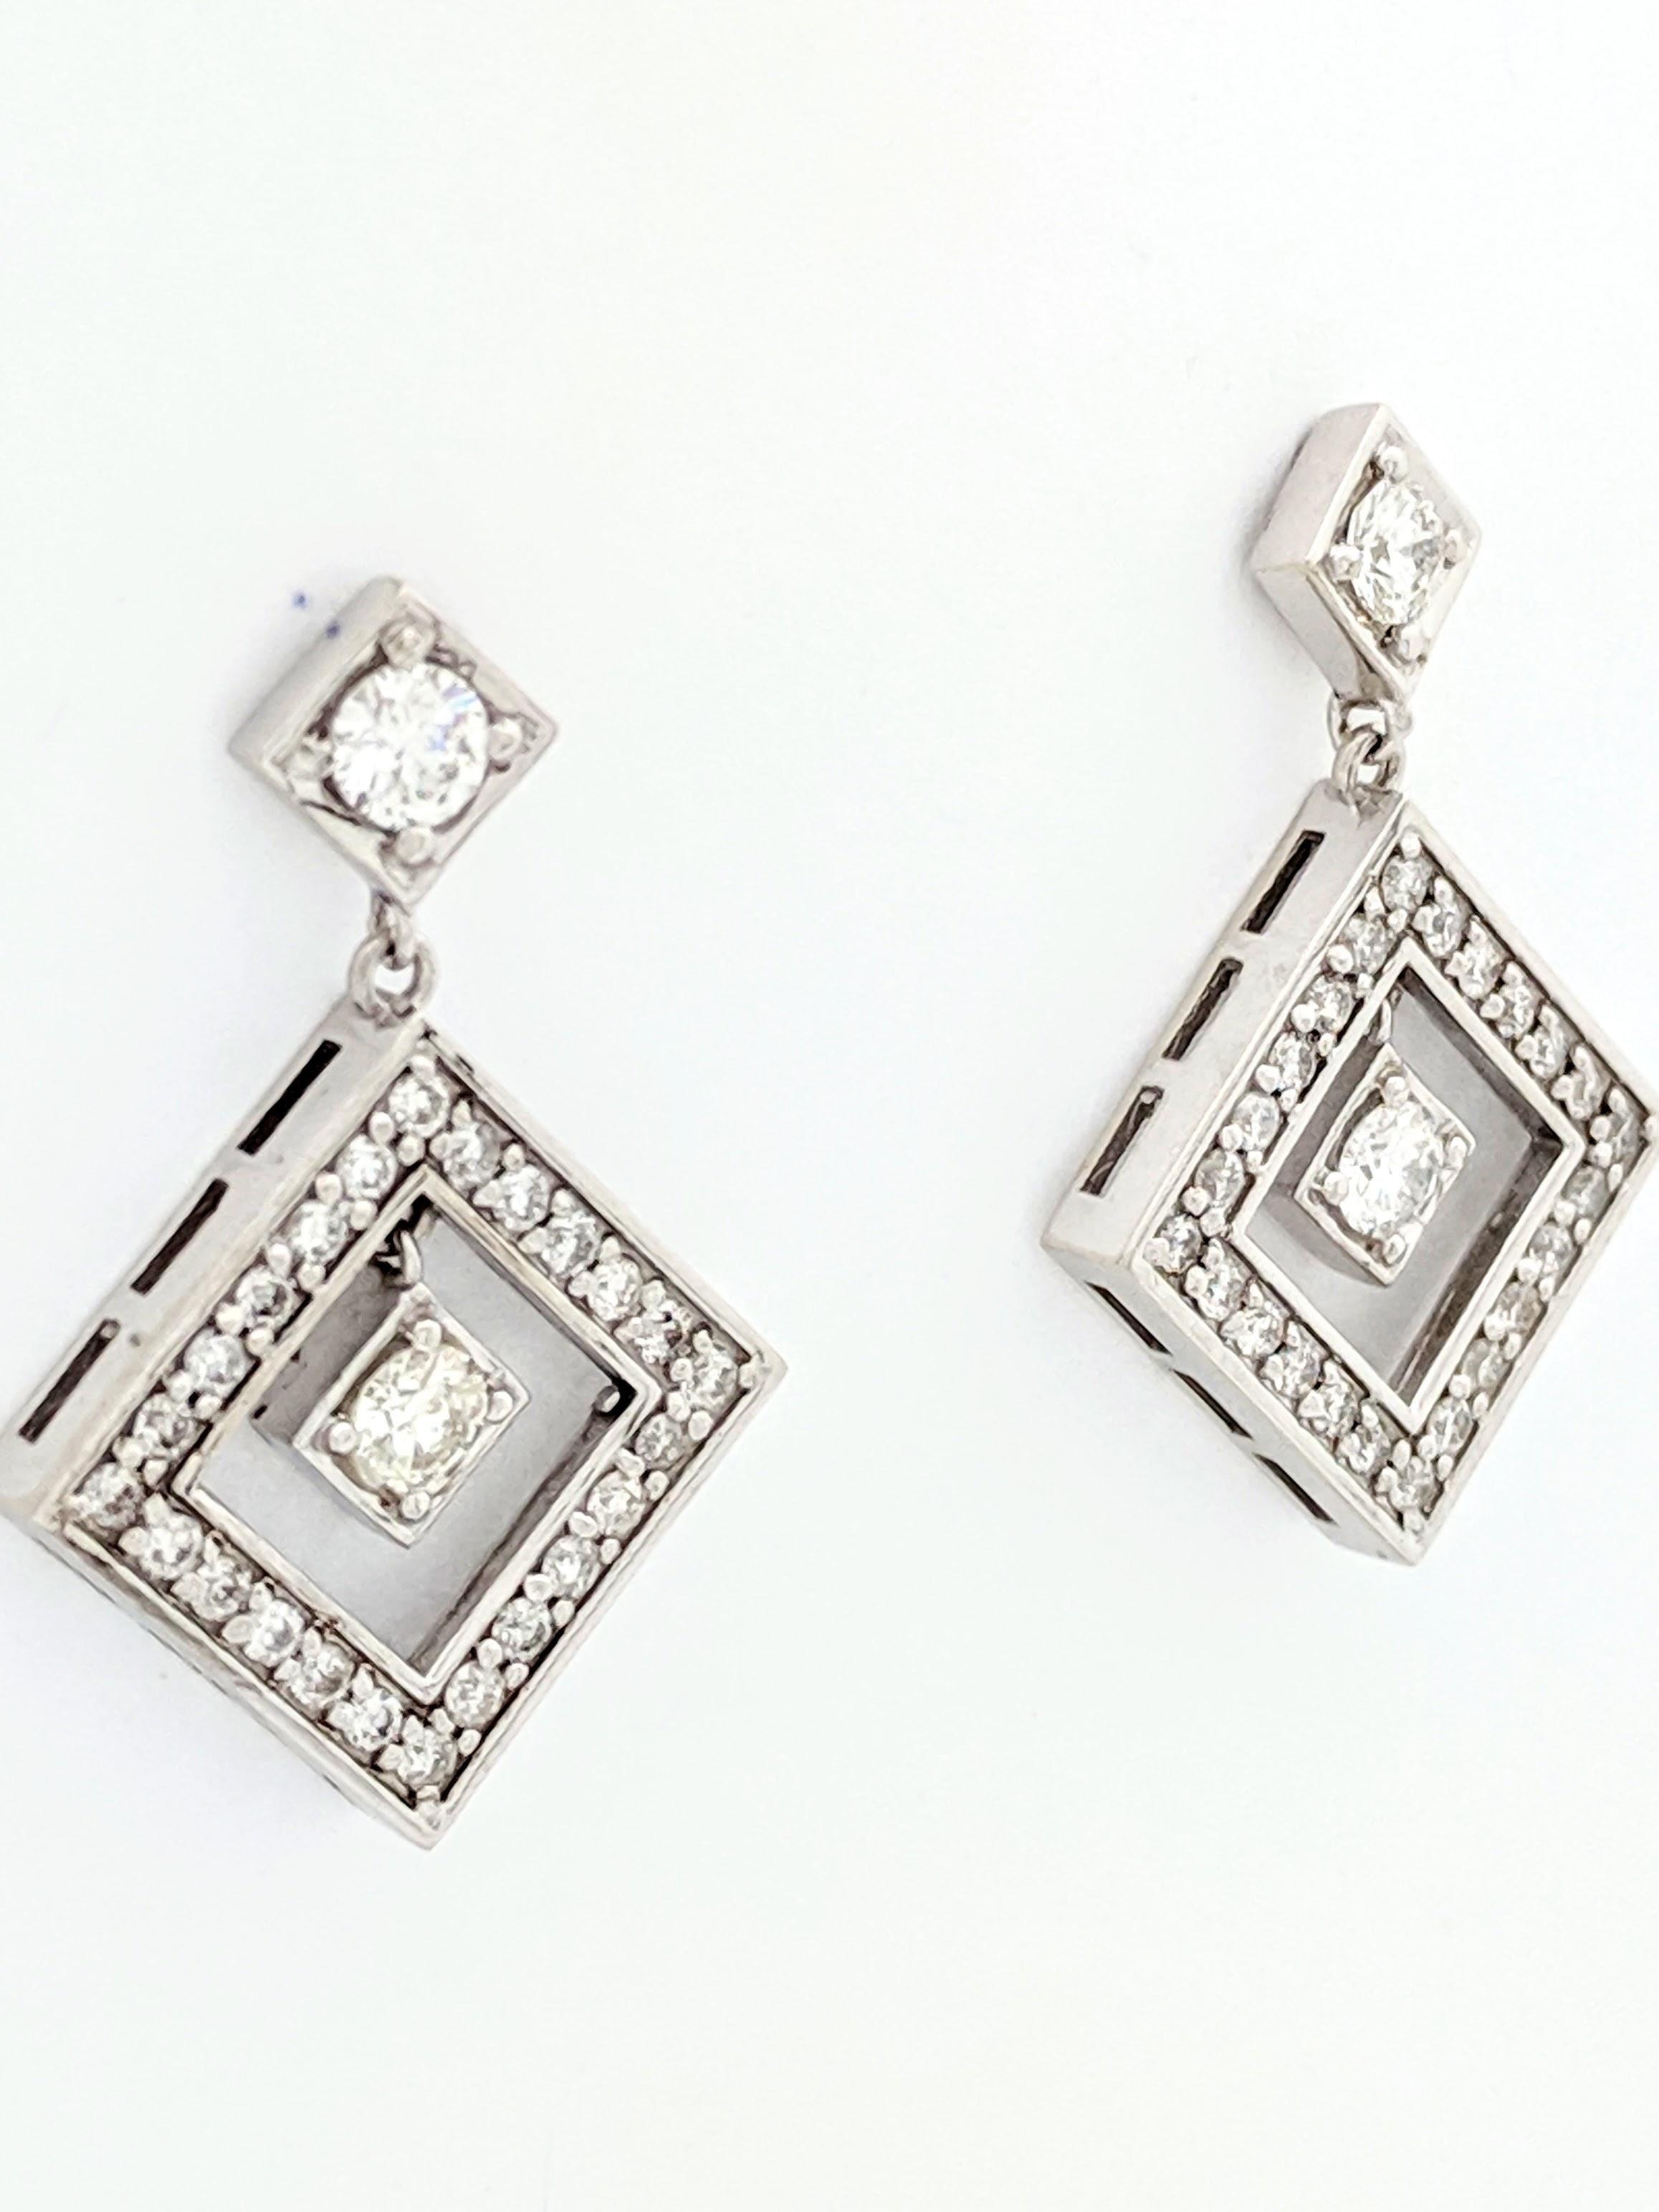 14 Karat White Gold 1.80 Carat Diamond Dangle/Drop Earrings SI2/H In Good Condition For Sale In Gainesville, FL